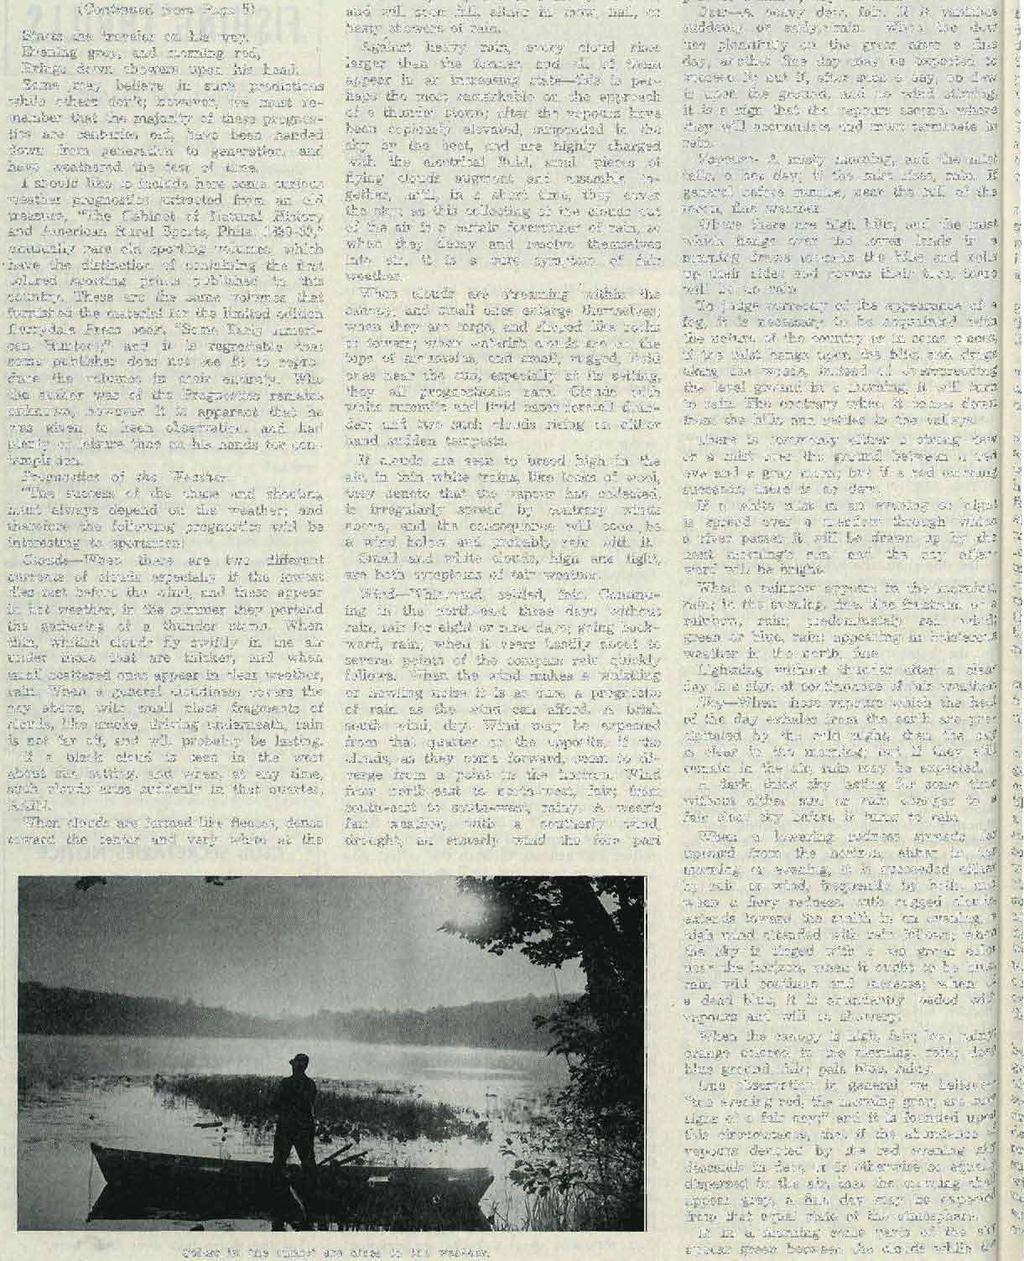 u PENNSYLVANIA ANGLER FISHERMEN'S WEATHER (Continued from Page 5) Starts the traveler on his way. Evening grey, and morning red, Brings down showers upon his head.